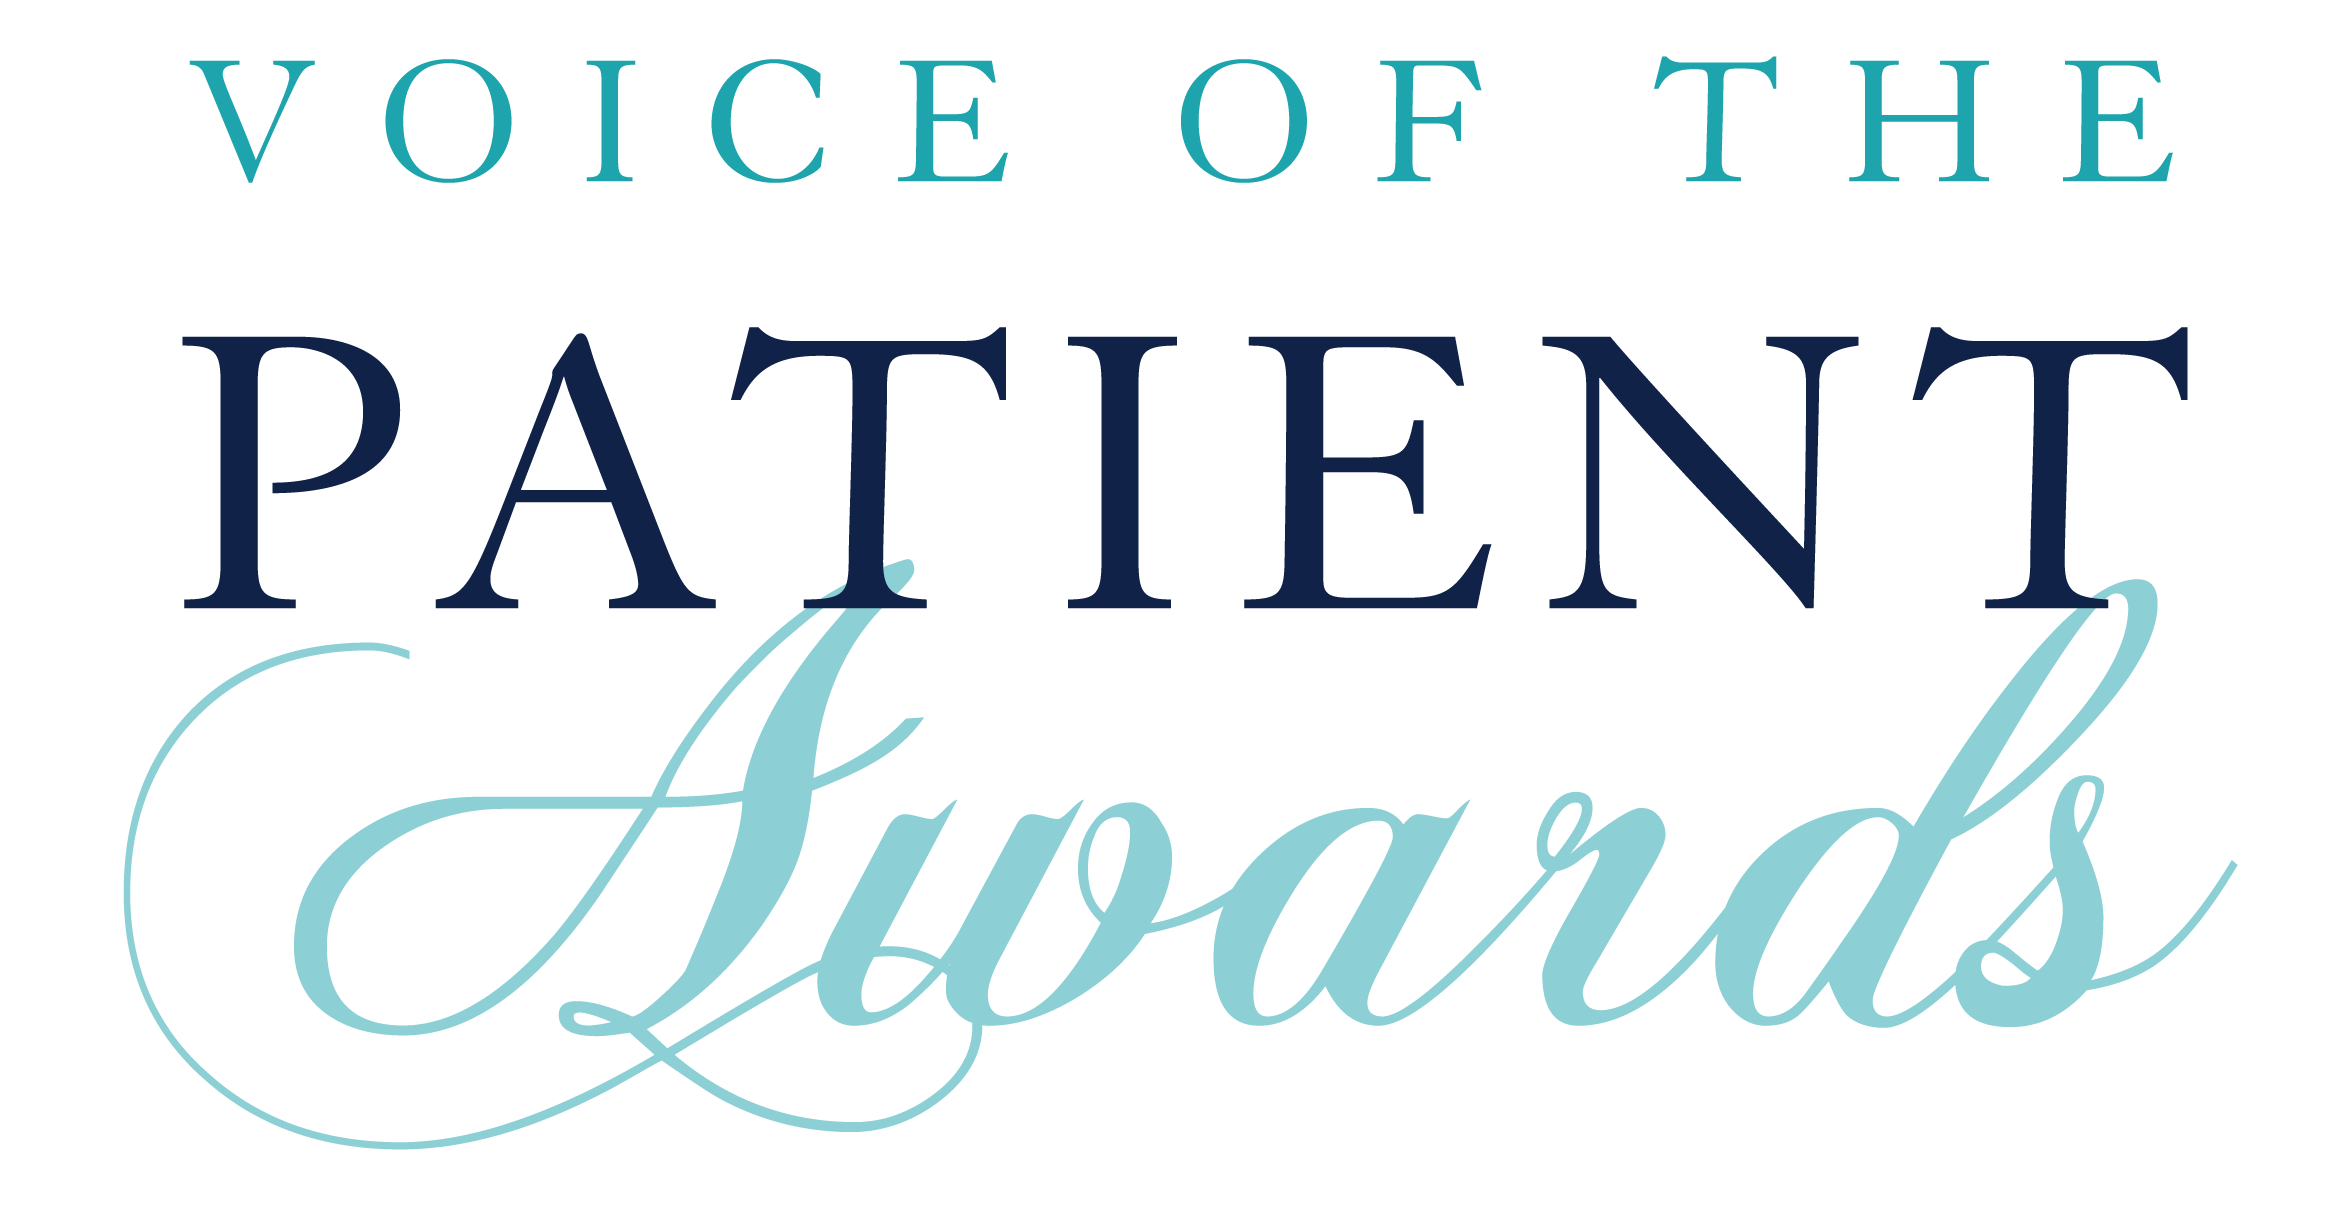 Voice of the Patient Awards logo